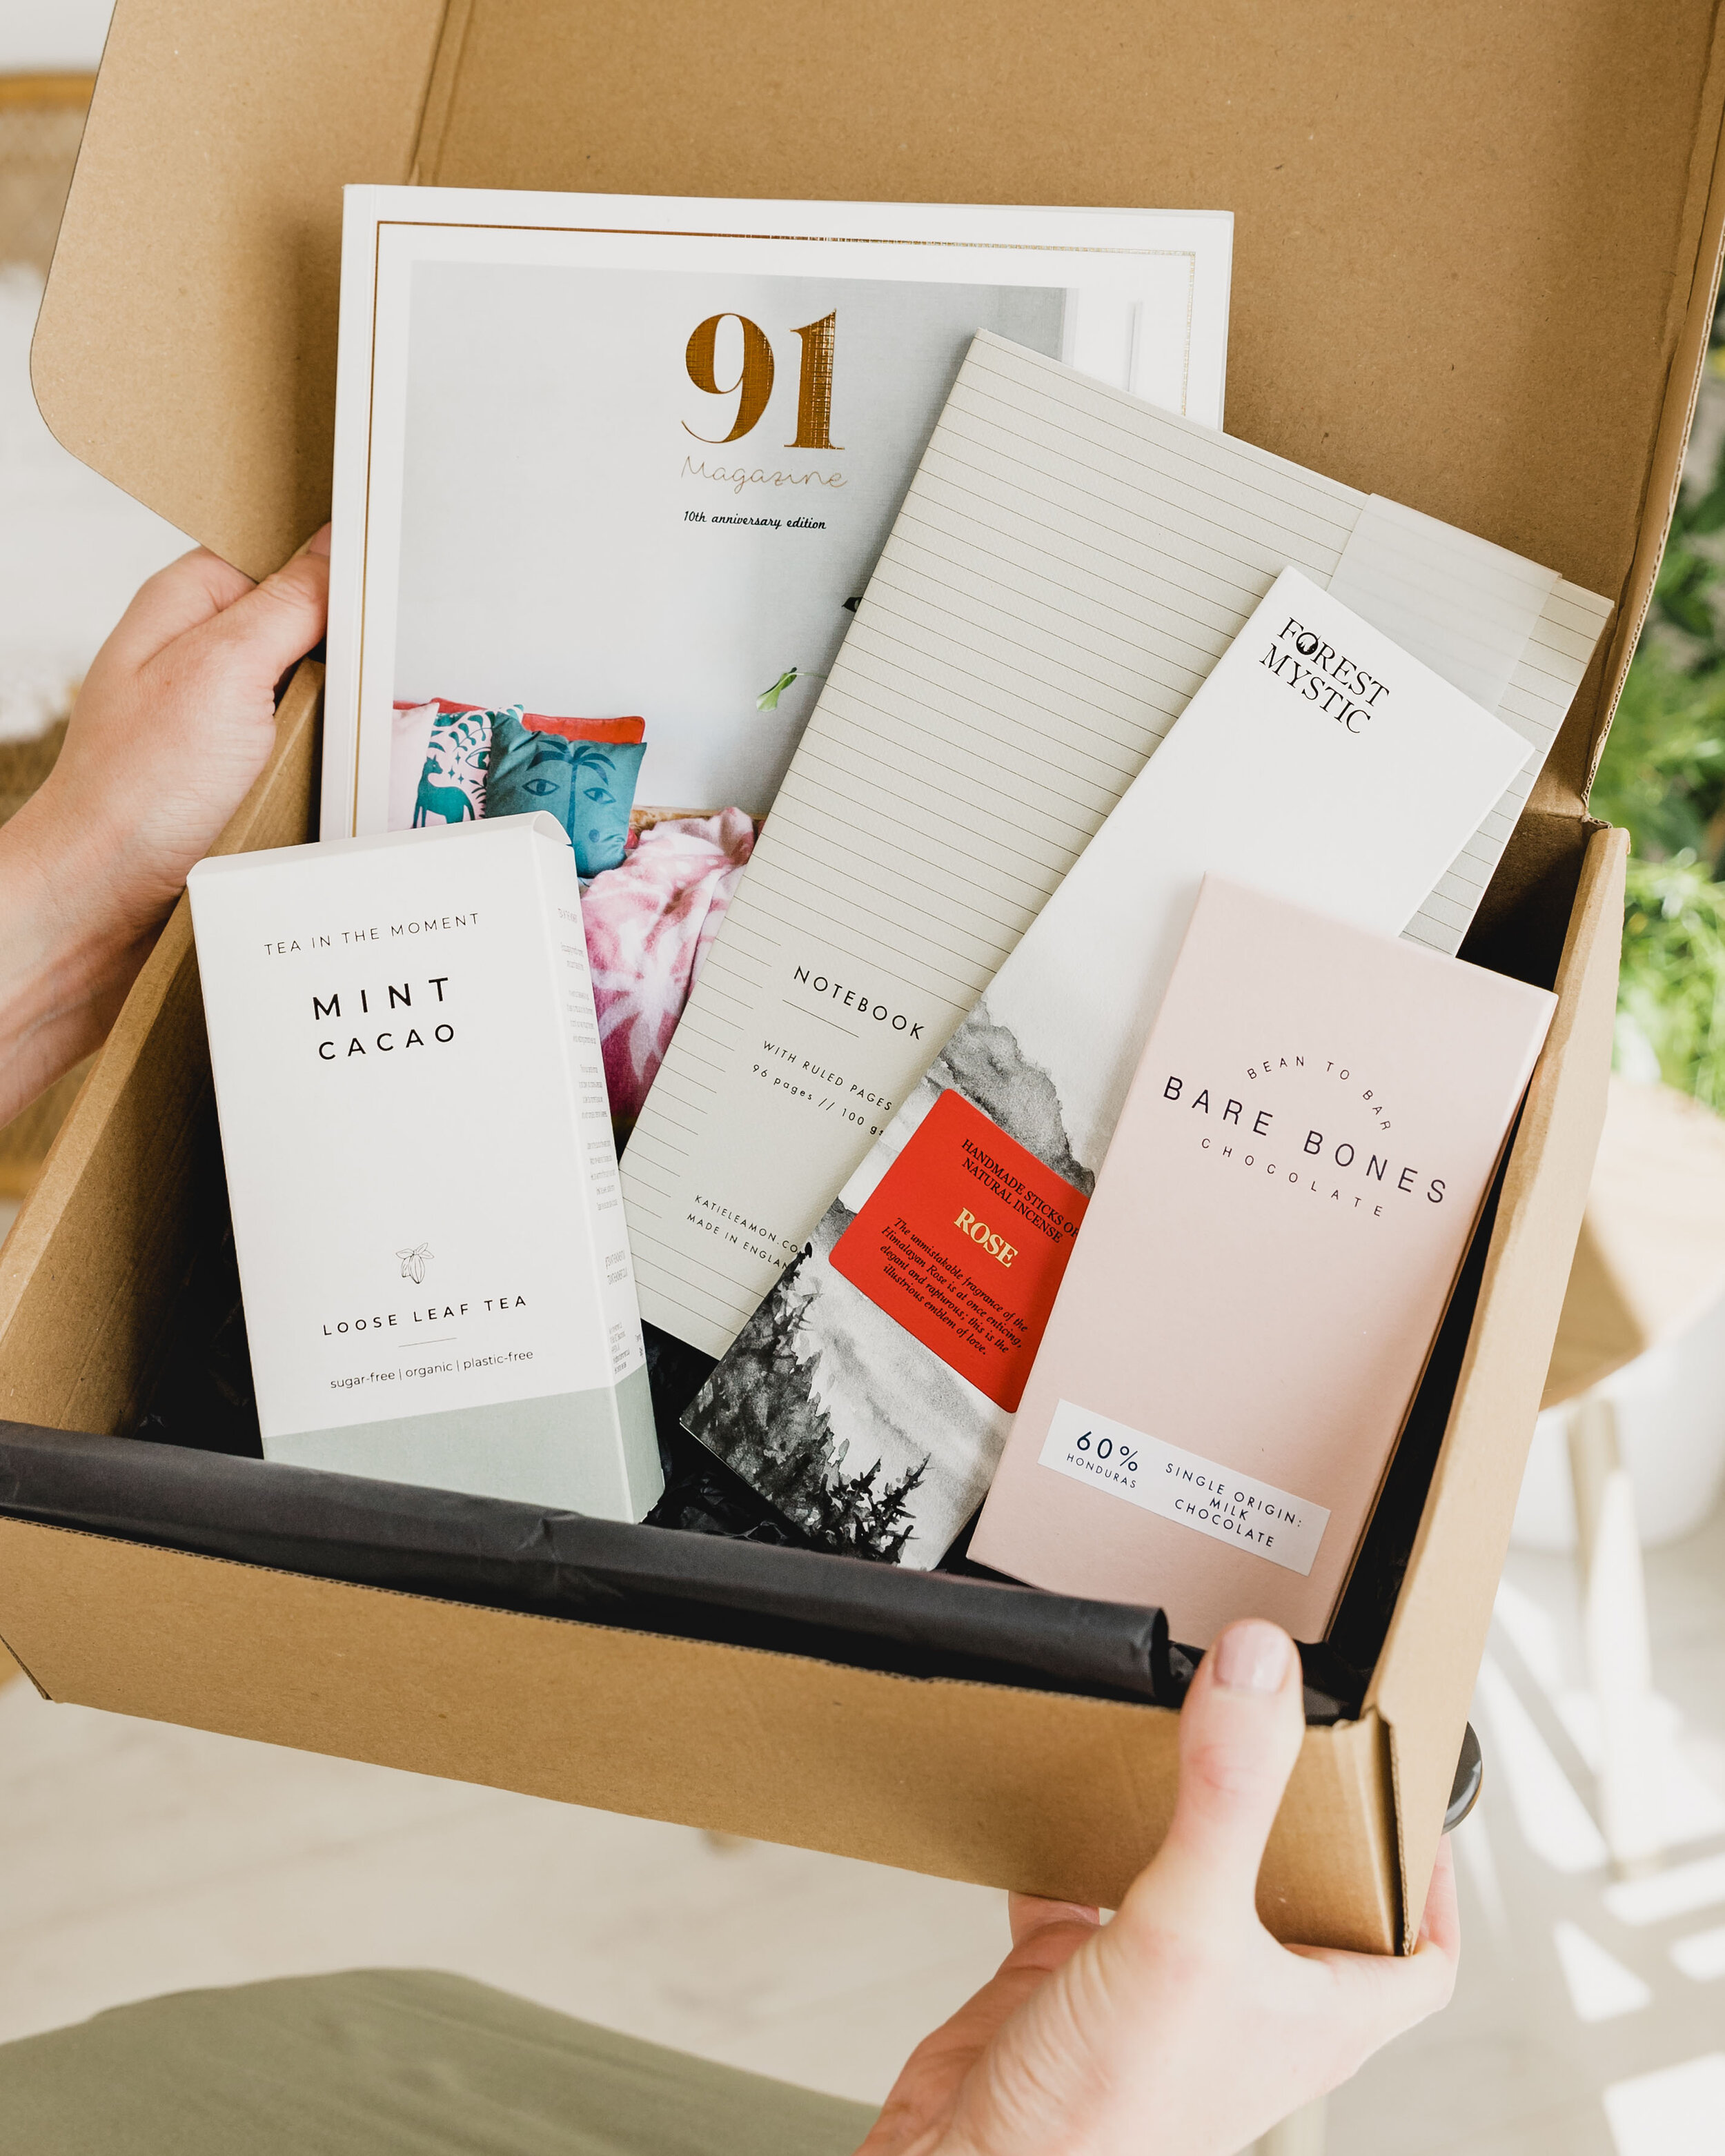 91-Magazine-Special-Moment-gift-box